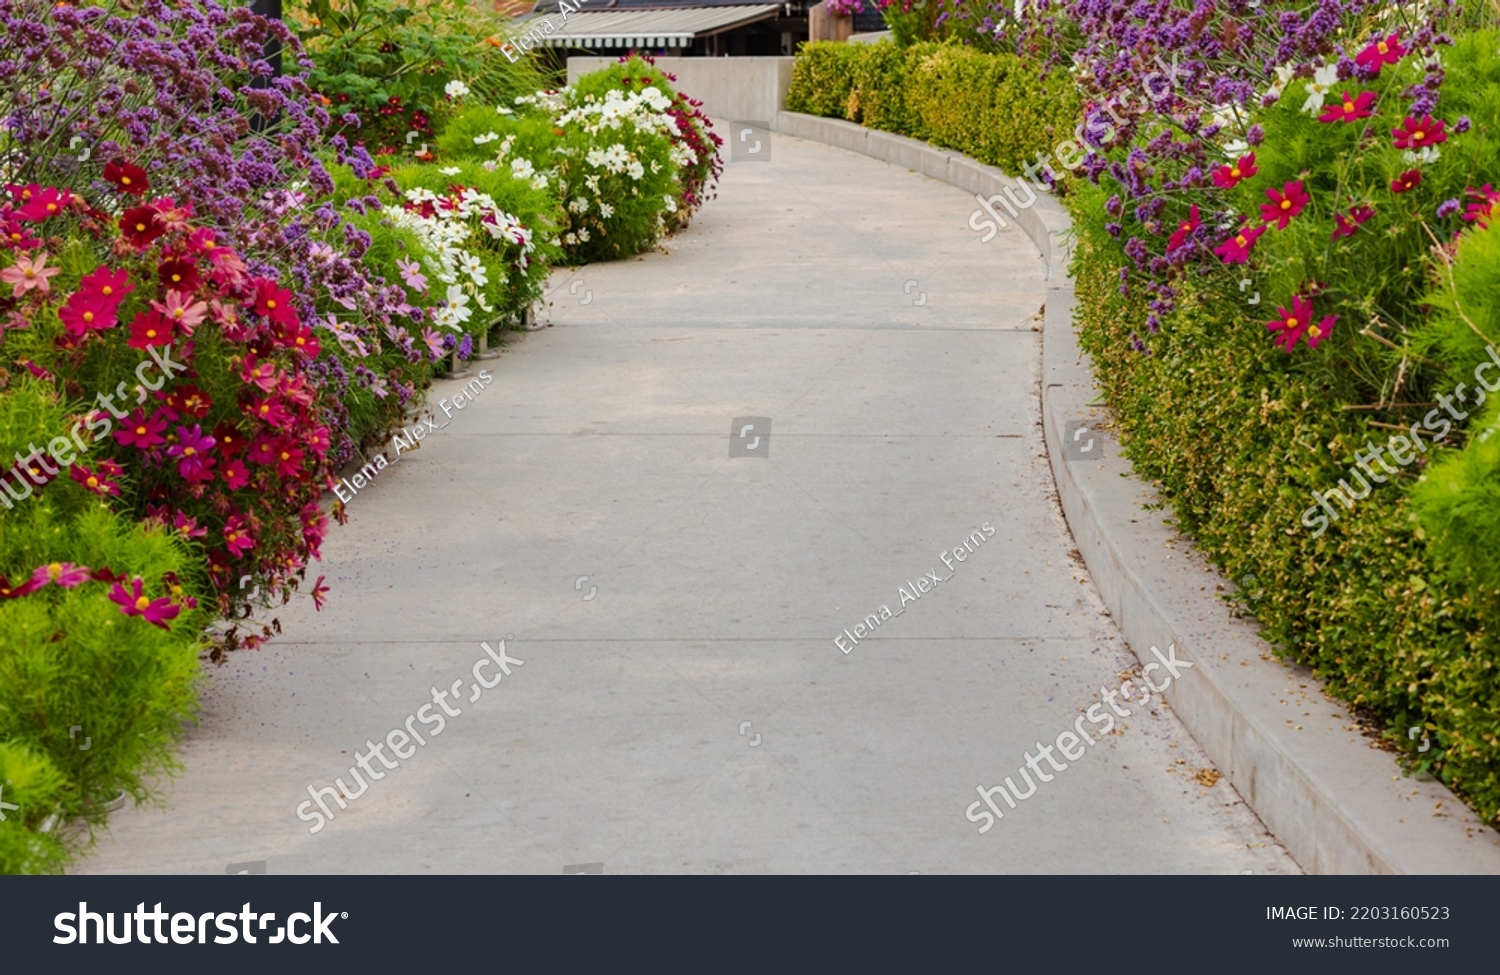 Walkway in flower garden in summer time. View of Colourful Flowerbeds in a good care maintenance landscapes and asfalt concrete walkway. Nobody, street photo, selective focus, blurred #2203160523